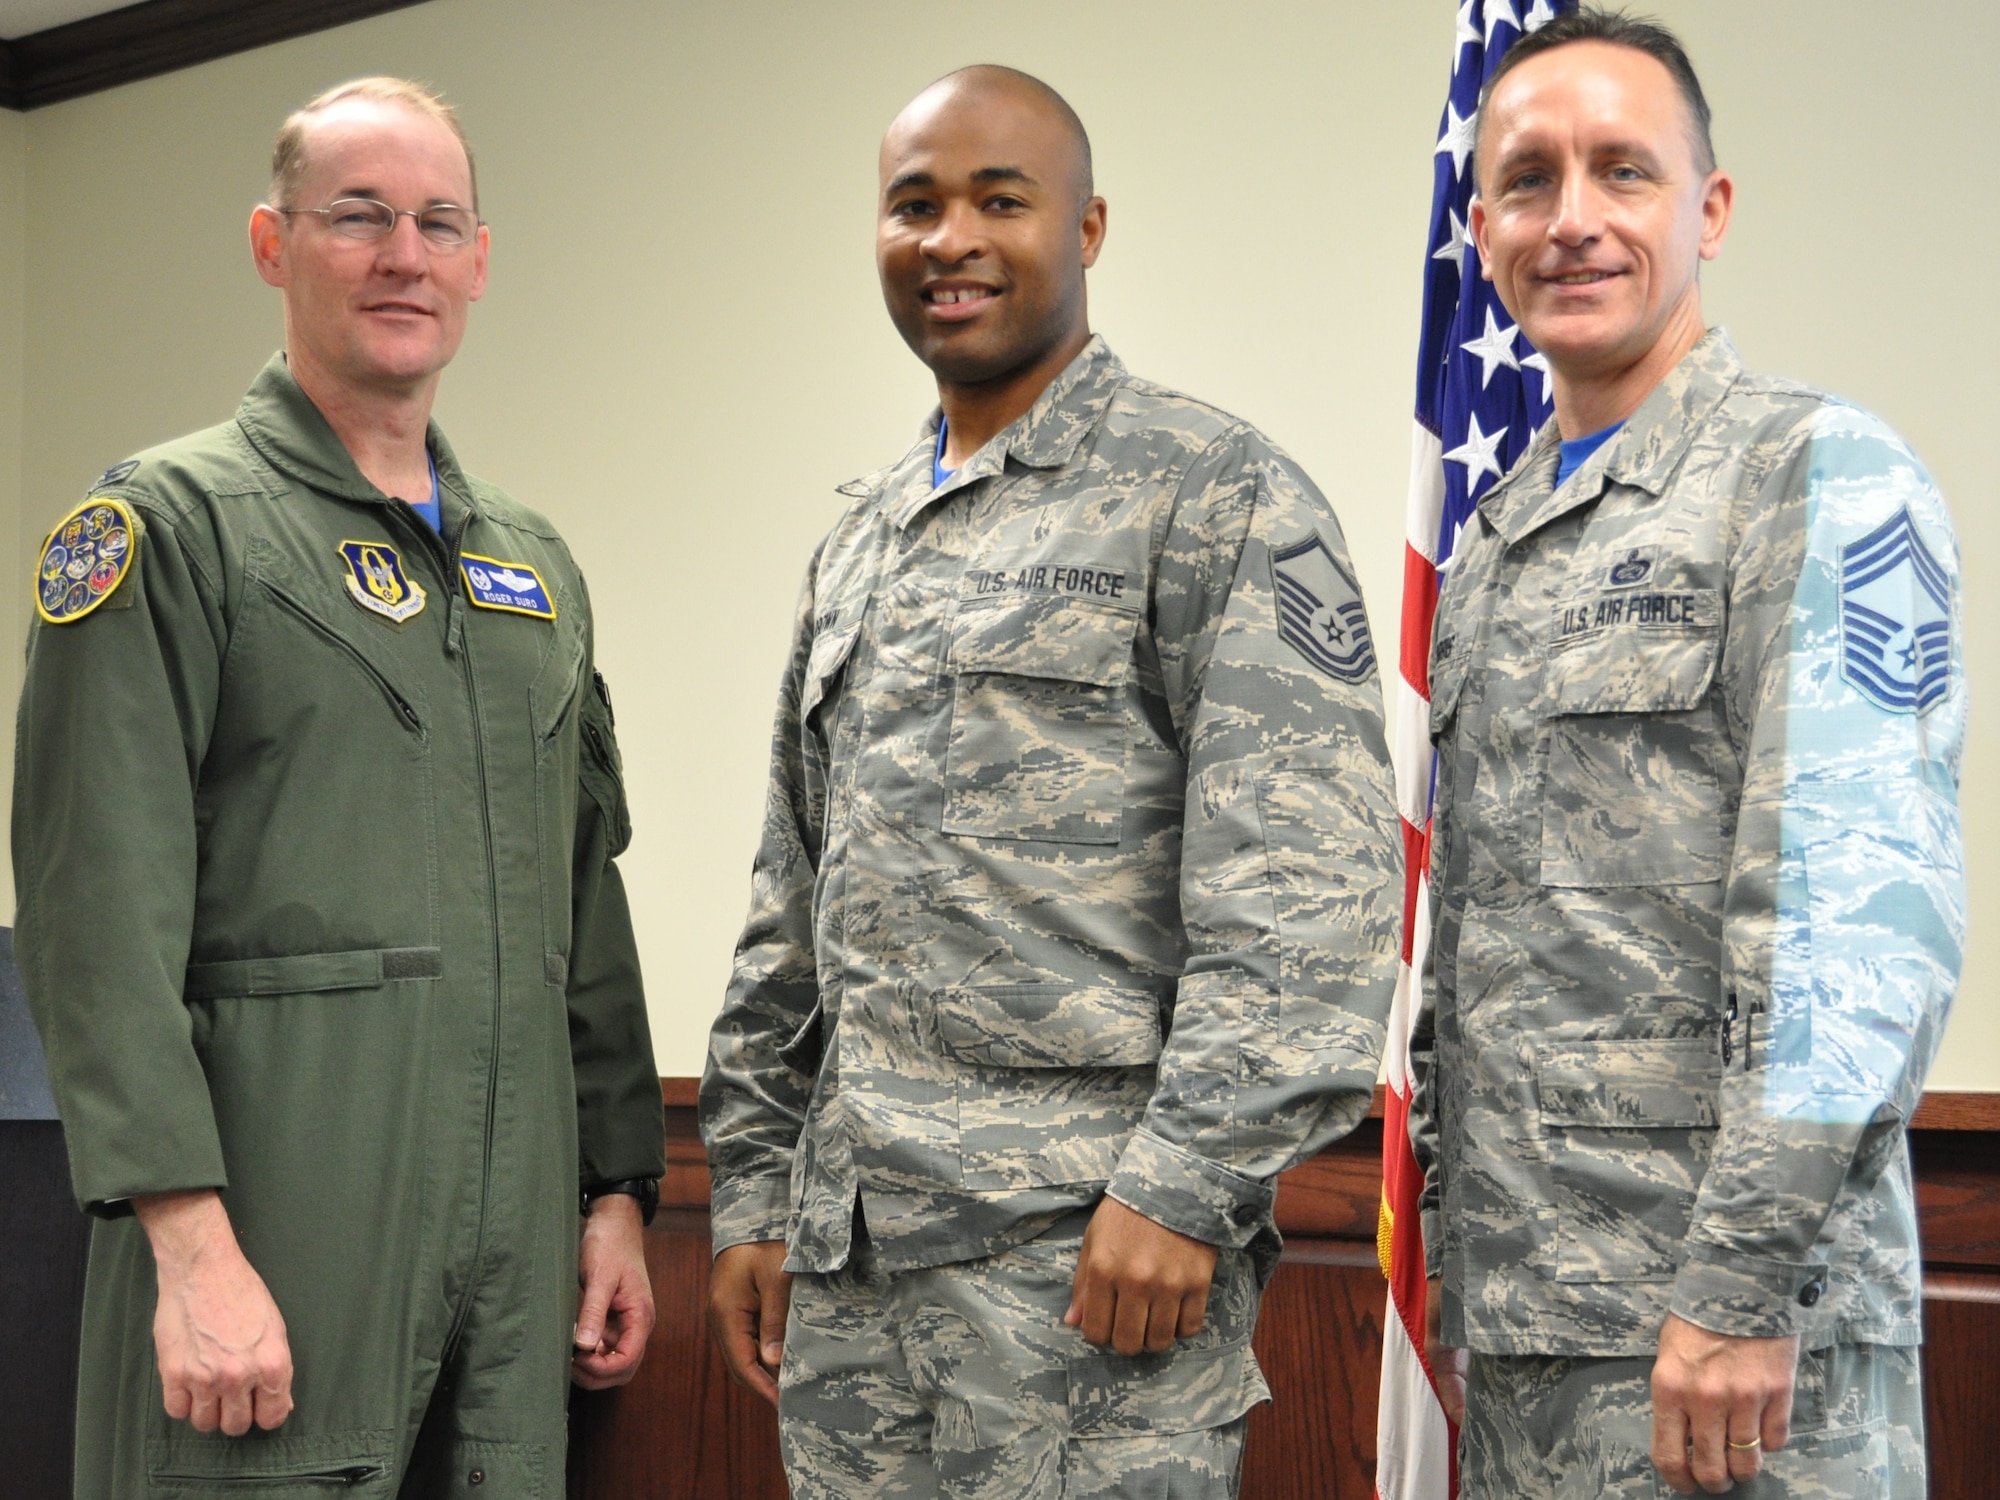 Master Sgt. Gregory Brown stands with 340th FTG commander, Col. Roger Suro (L) and Chief Master Sgt. Jimmie Morris, group superintendent to receive a Joint Service Achievement Medal during the Group's MUTA held Dec. 1-2 at Joint Base San Antonio-Randolph, Texas (Photo by Janis El Shabazz).